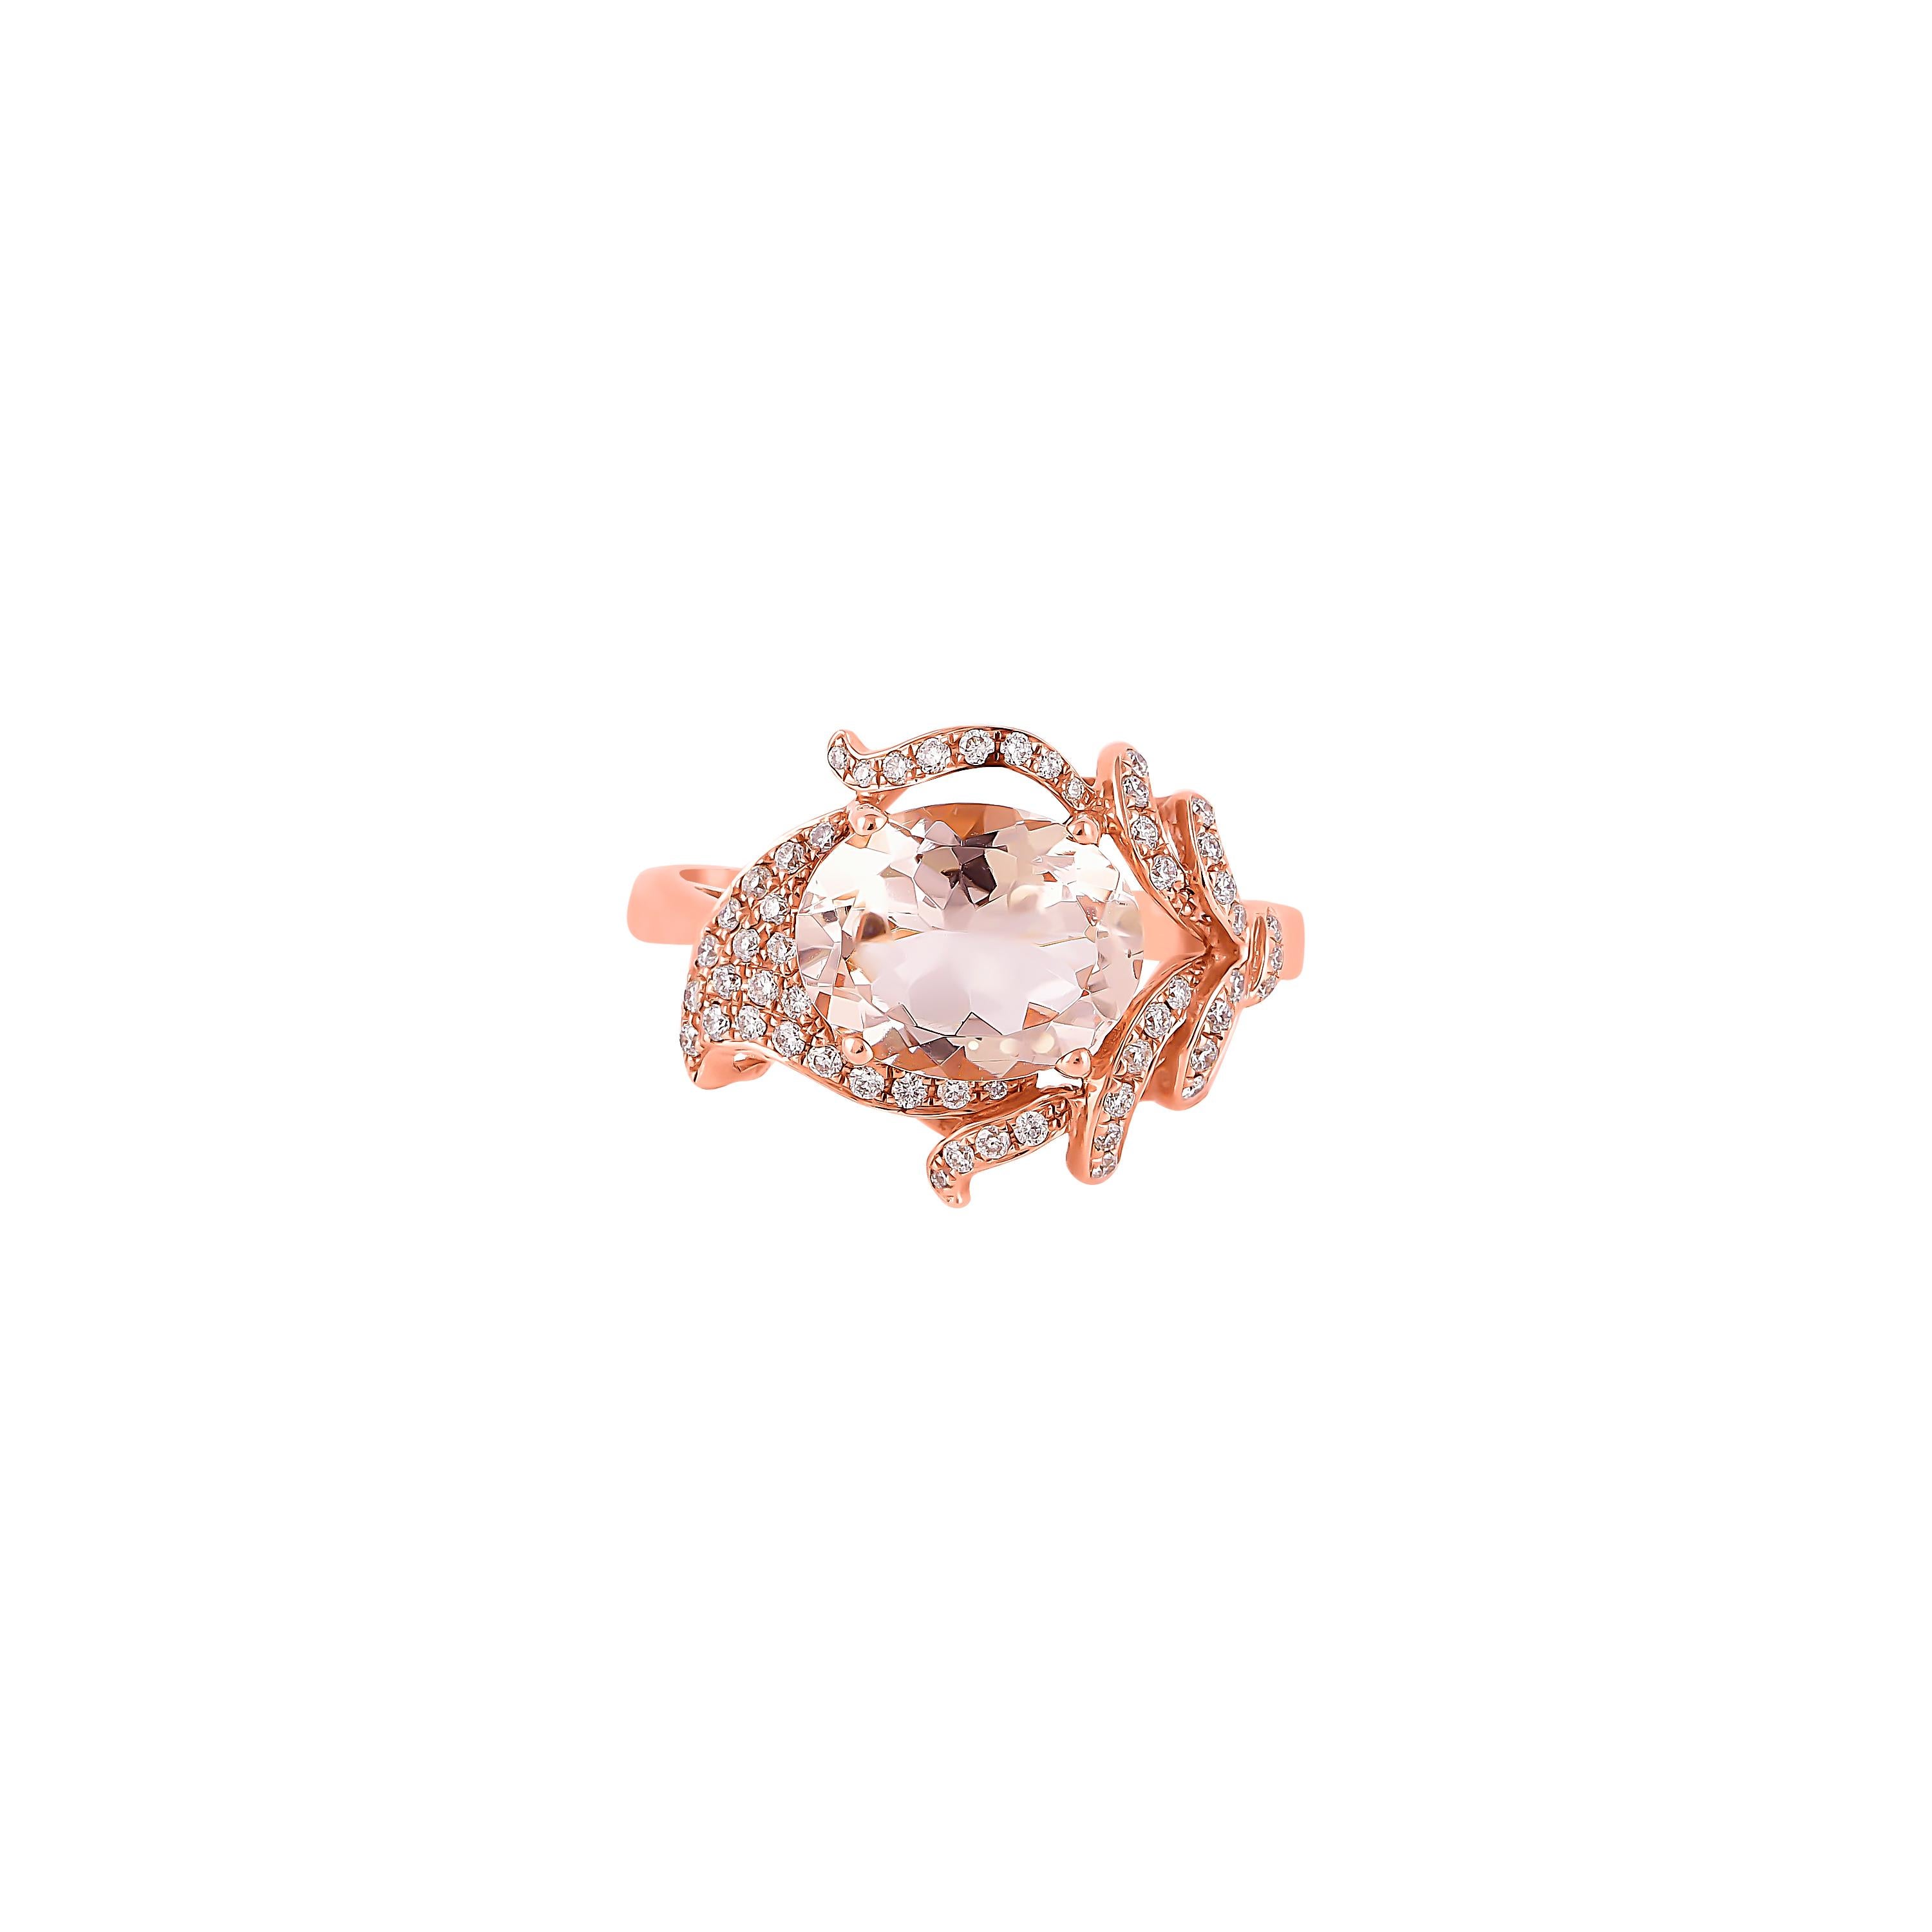 Contemporary 2.17 Carat Morganite and Diamond Ring in 18 Karat Rose Gold For Sale